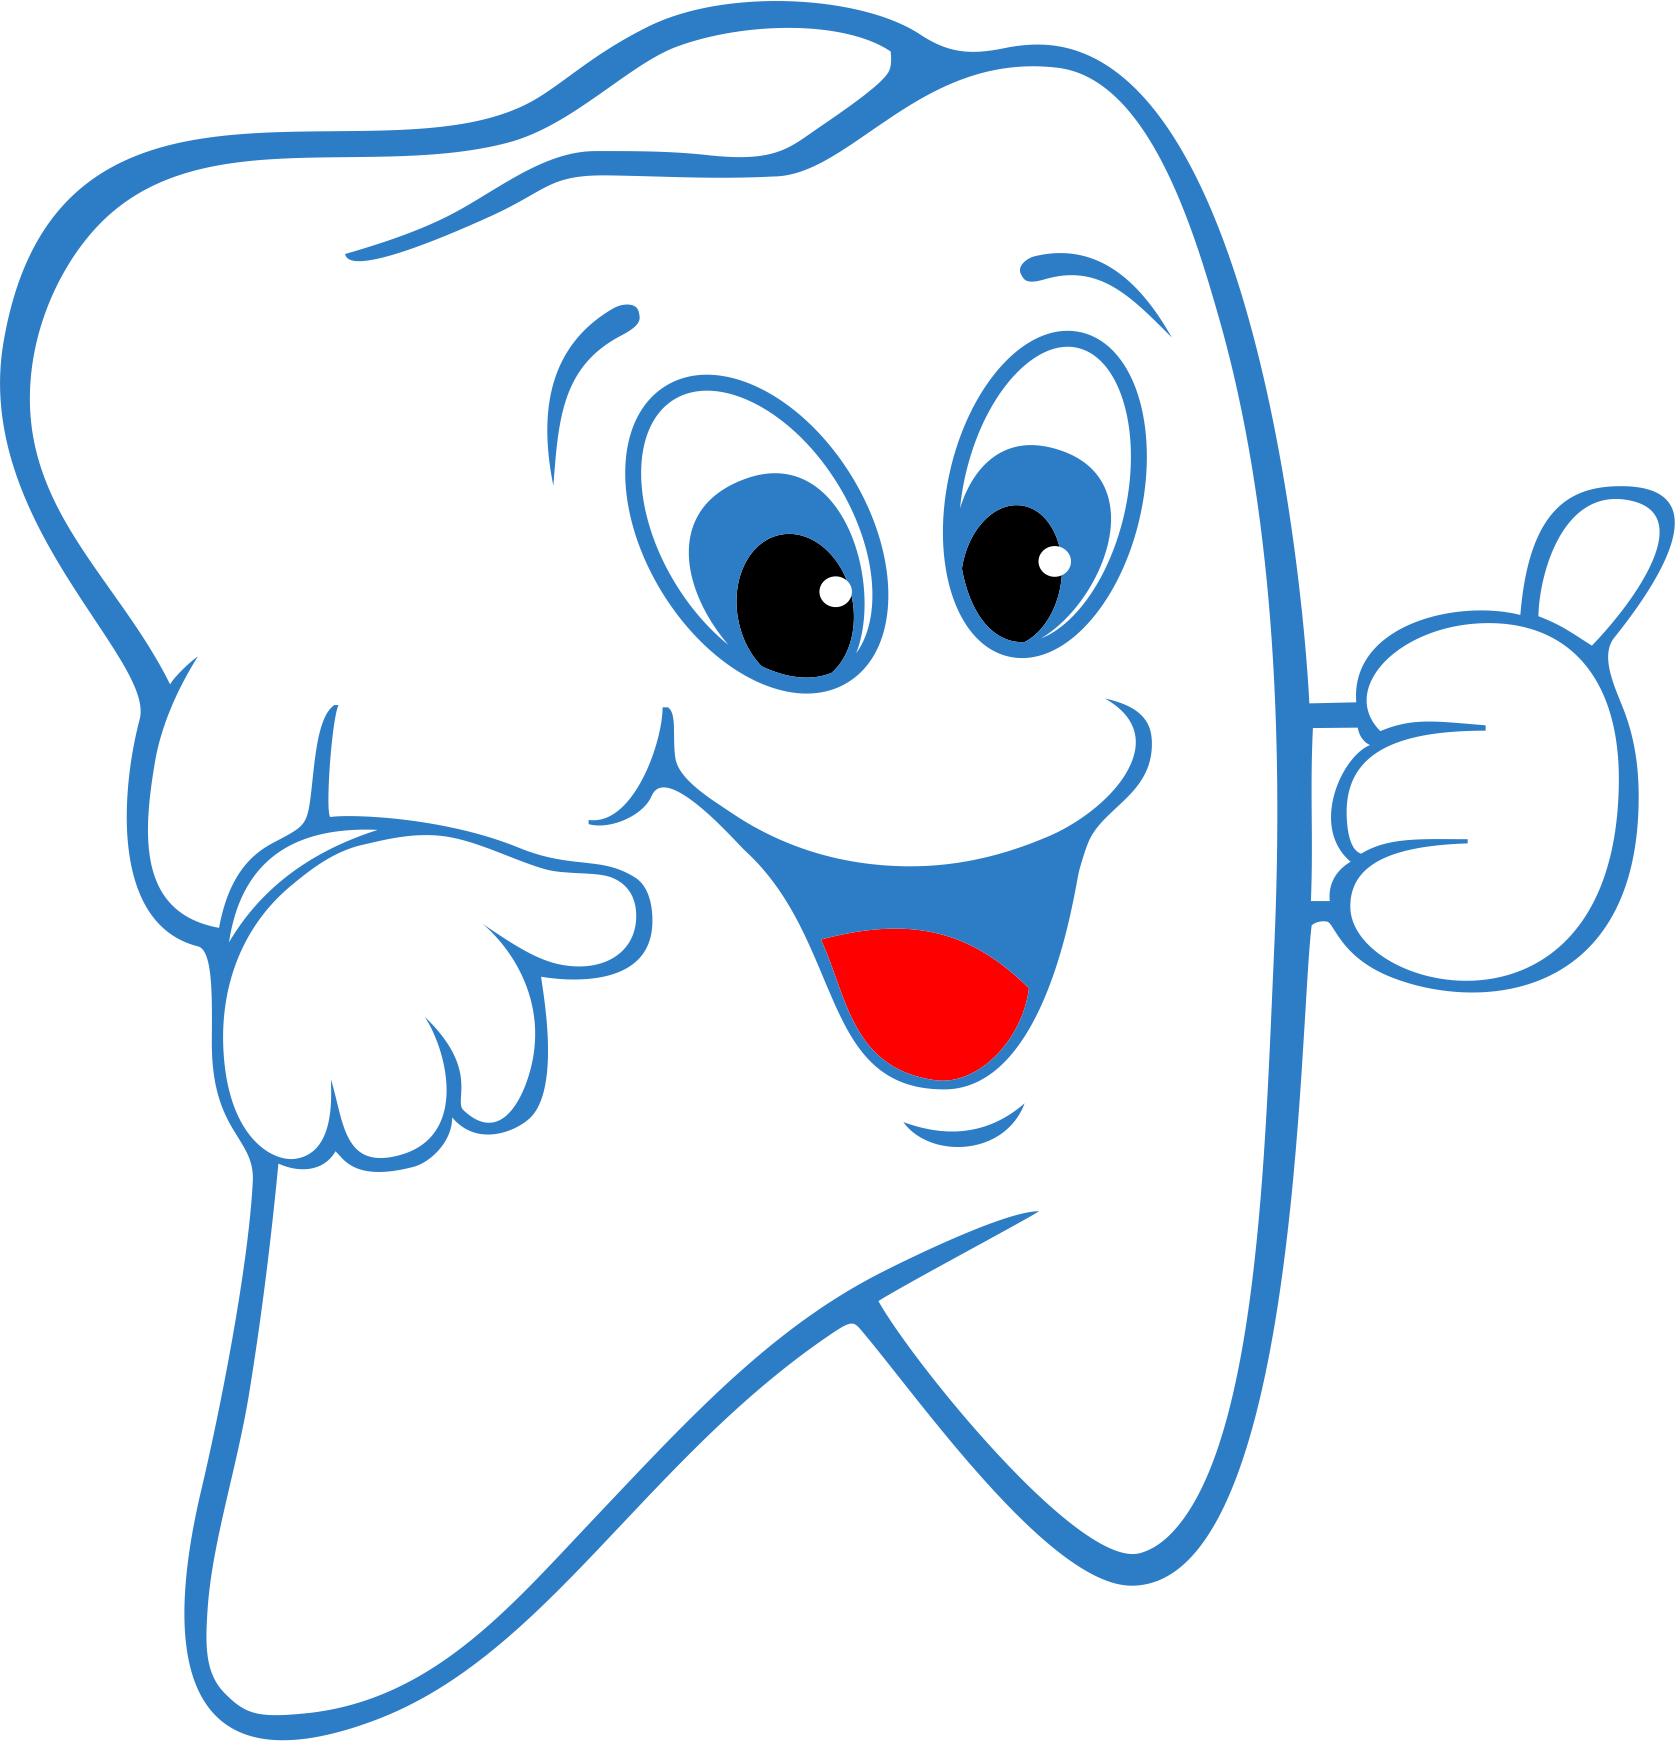 Dental dentistry clipart free clipart image image